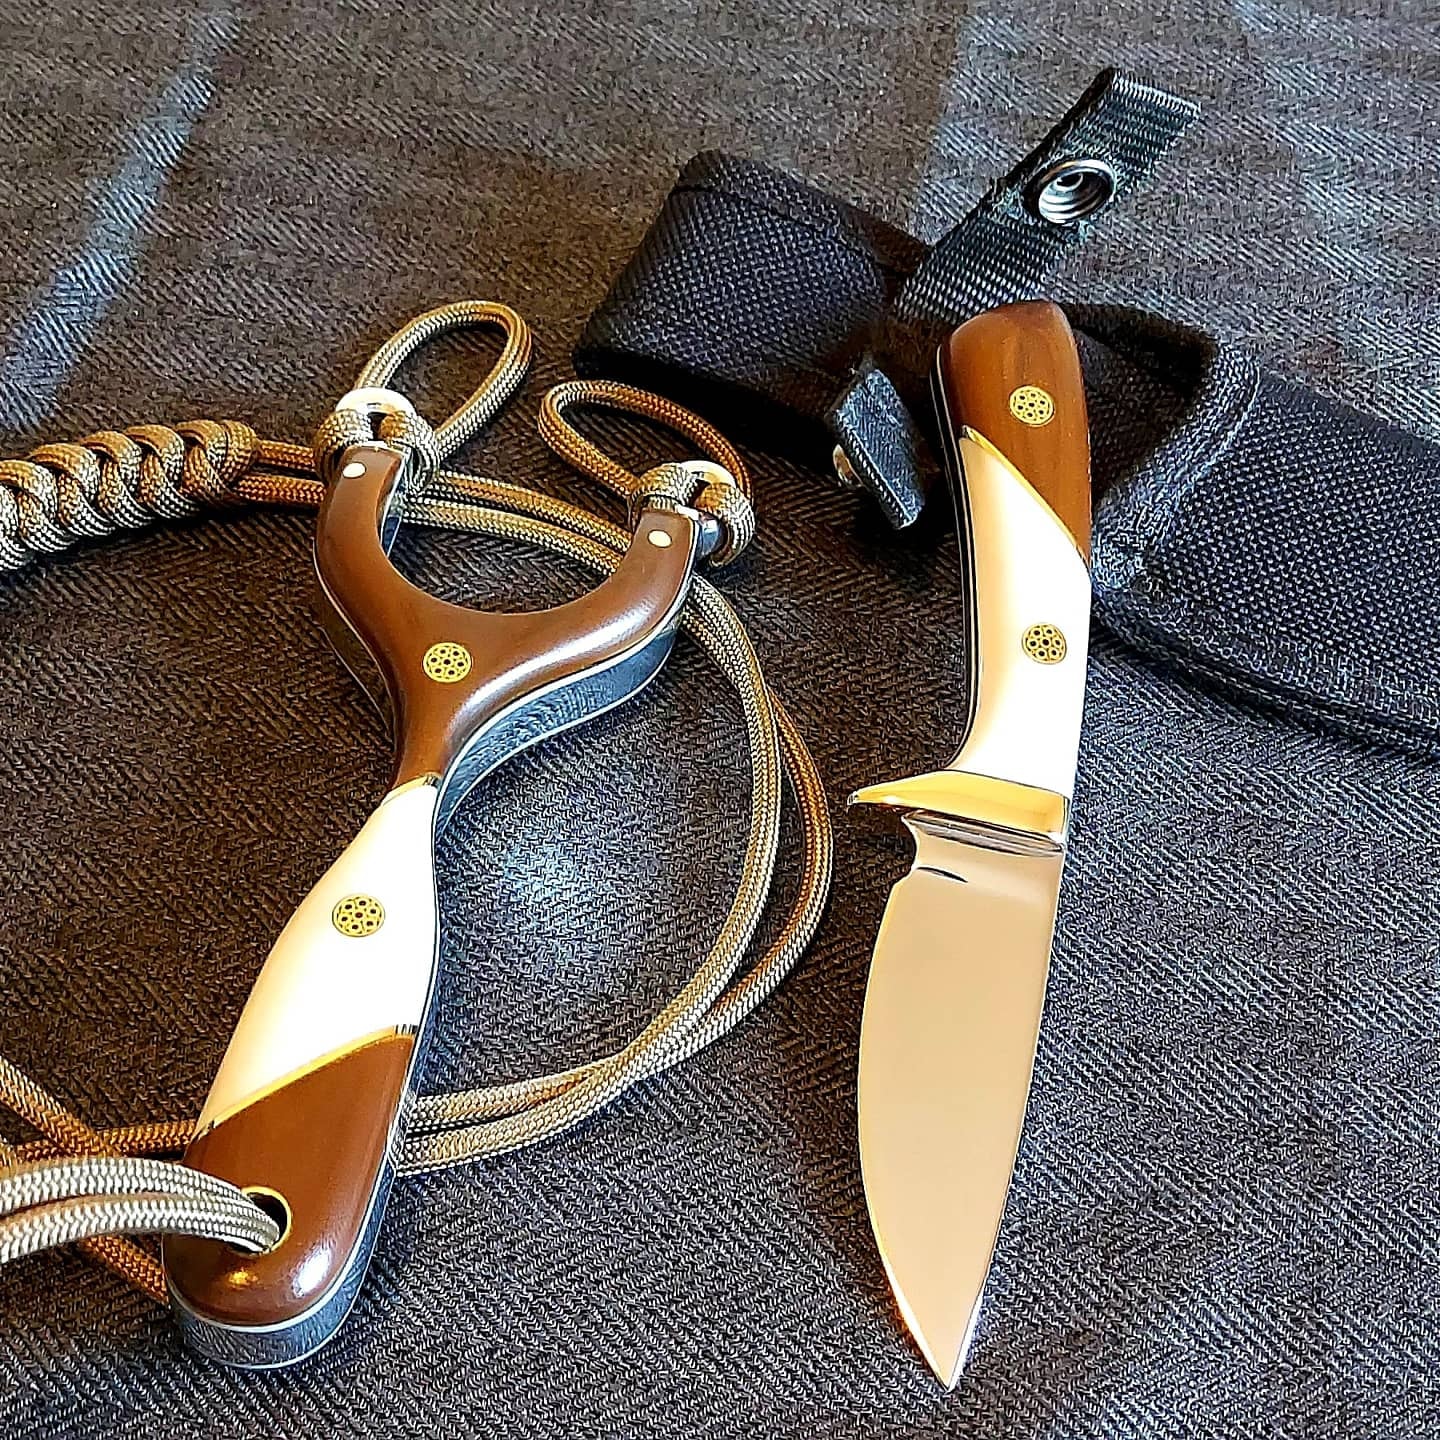 Danny makes full sets as well, like this knife and slingshot set